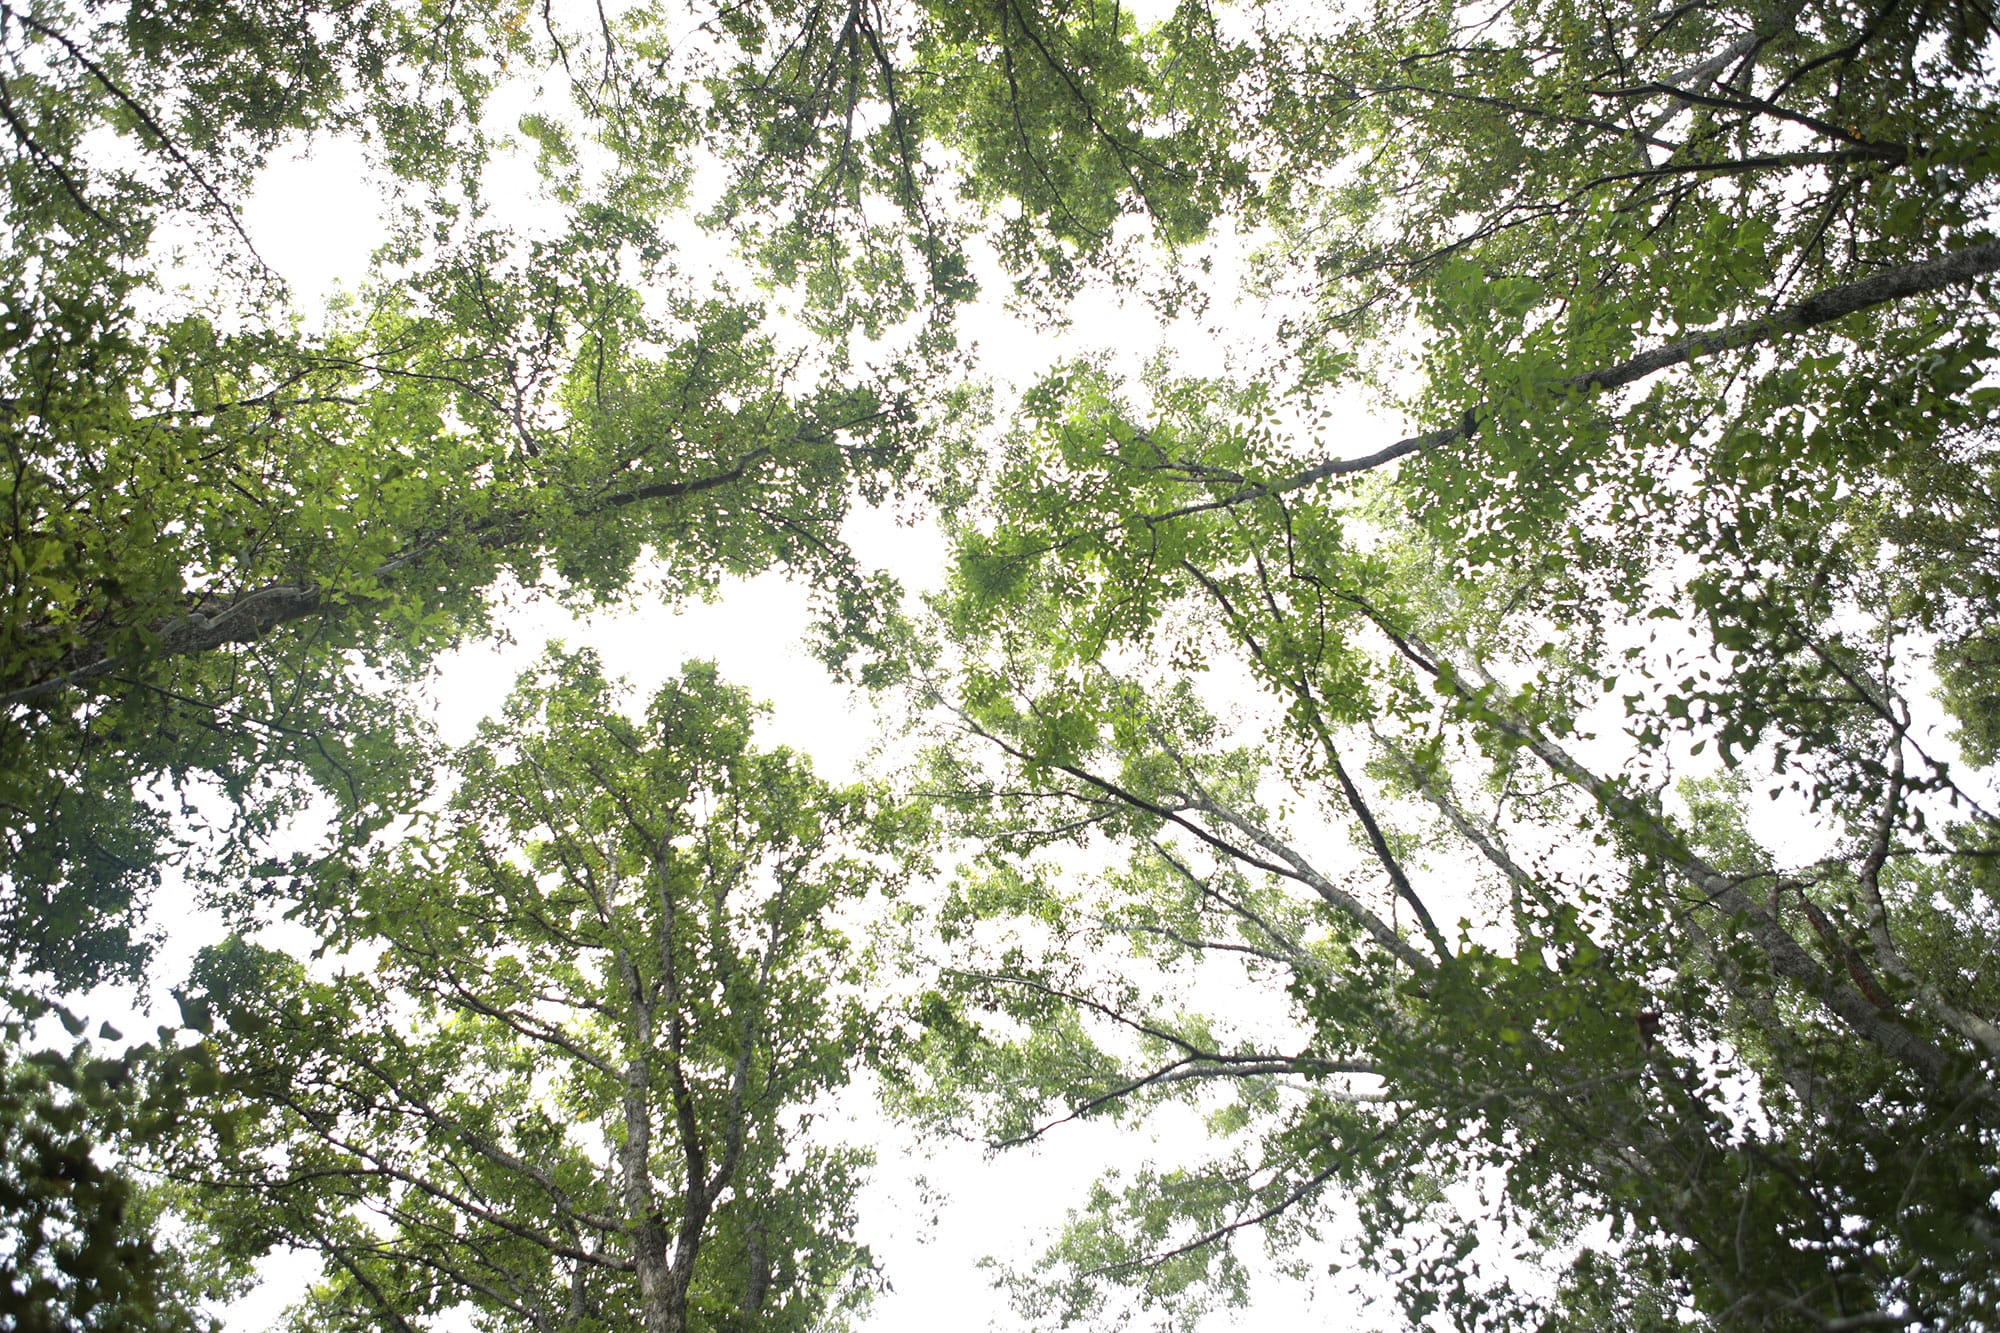 Looking up at trees in a forest.